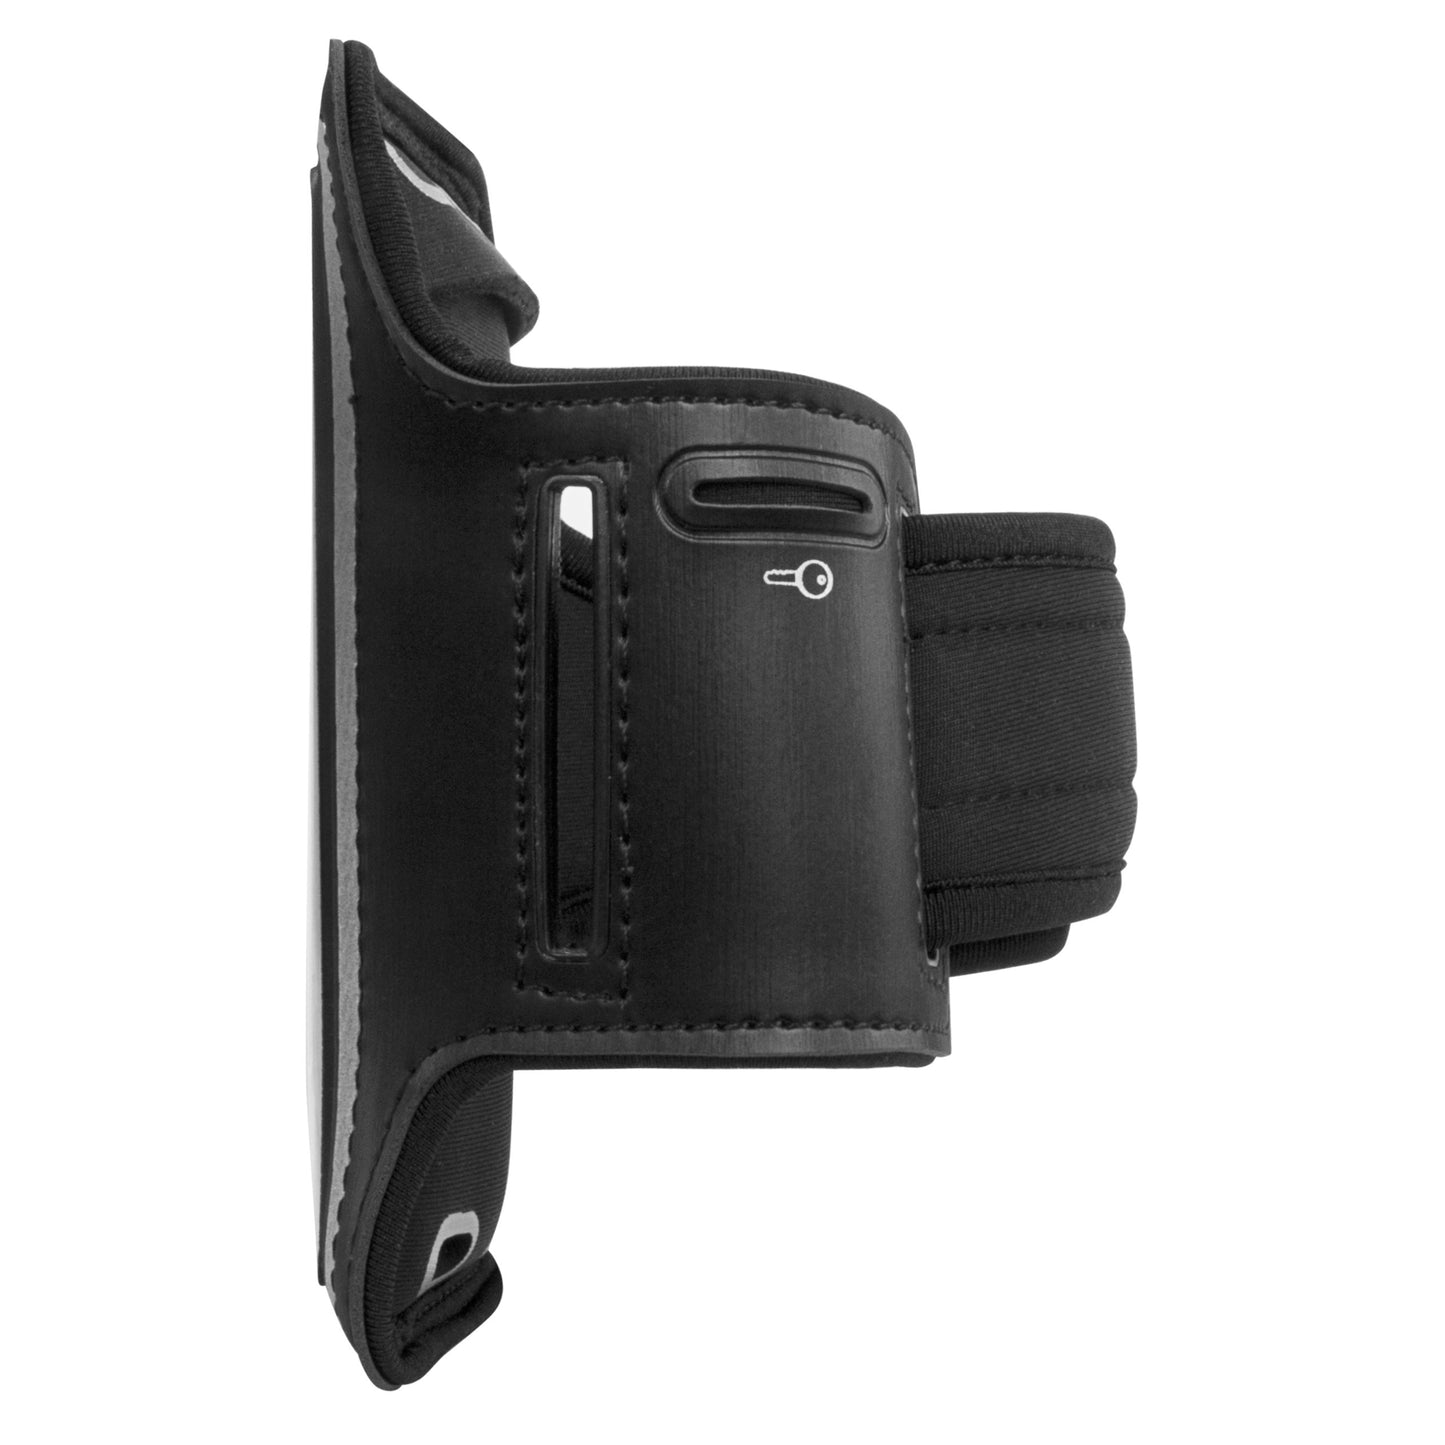 iSound Front Runner Exercise Armband for iPhone an iPod touch (Black)